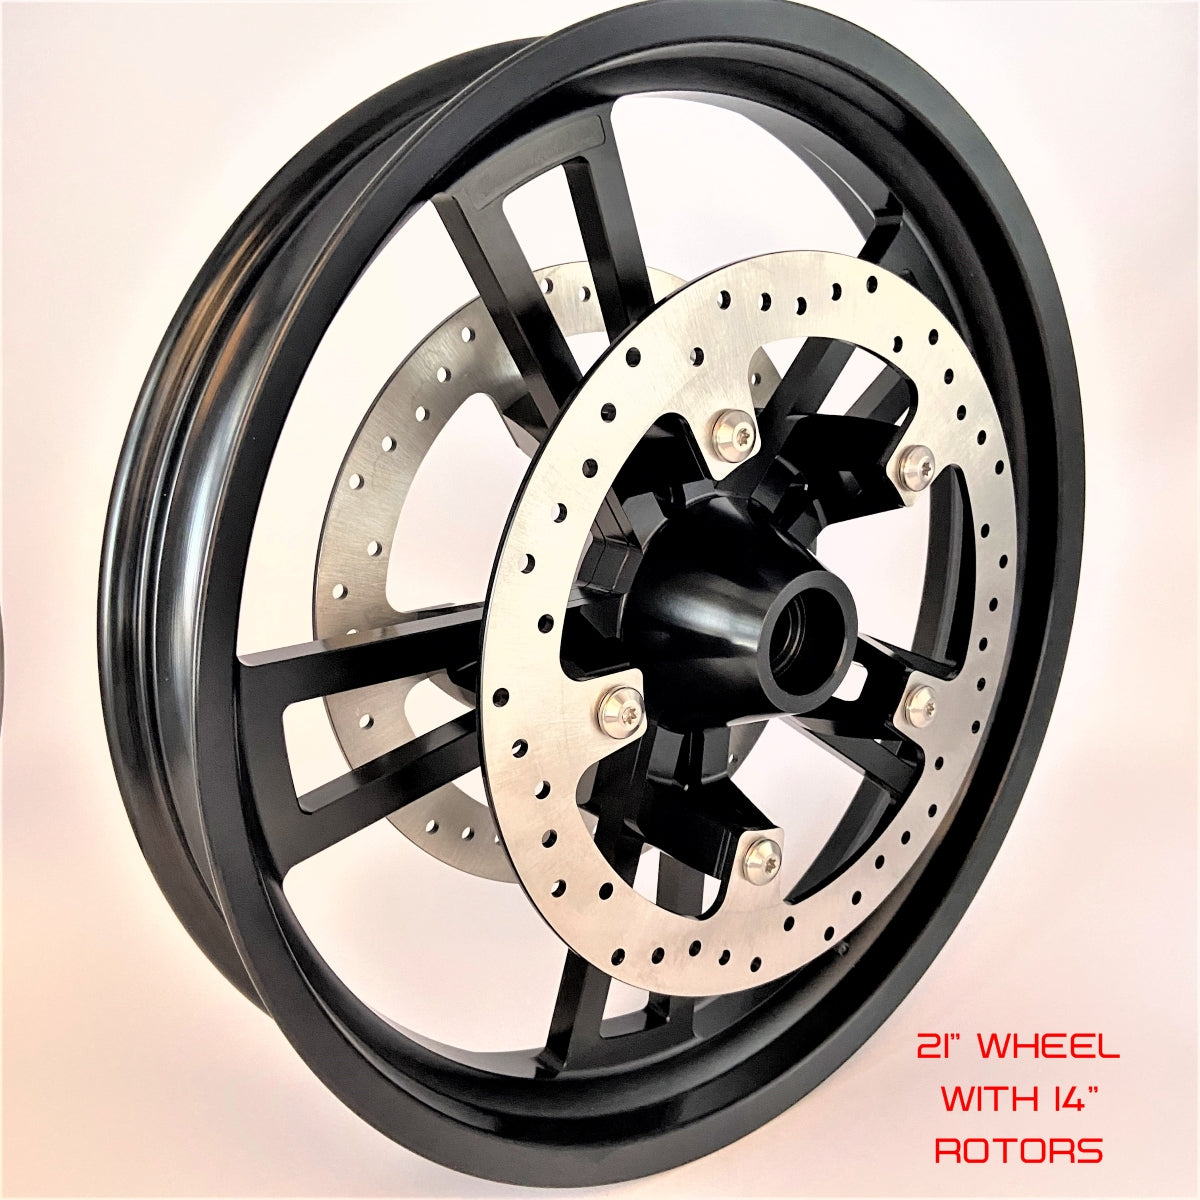 GeezerEngineering 19" or 21" front wheel with 14" rotors for Harley